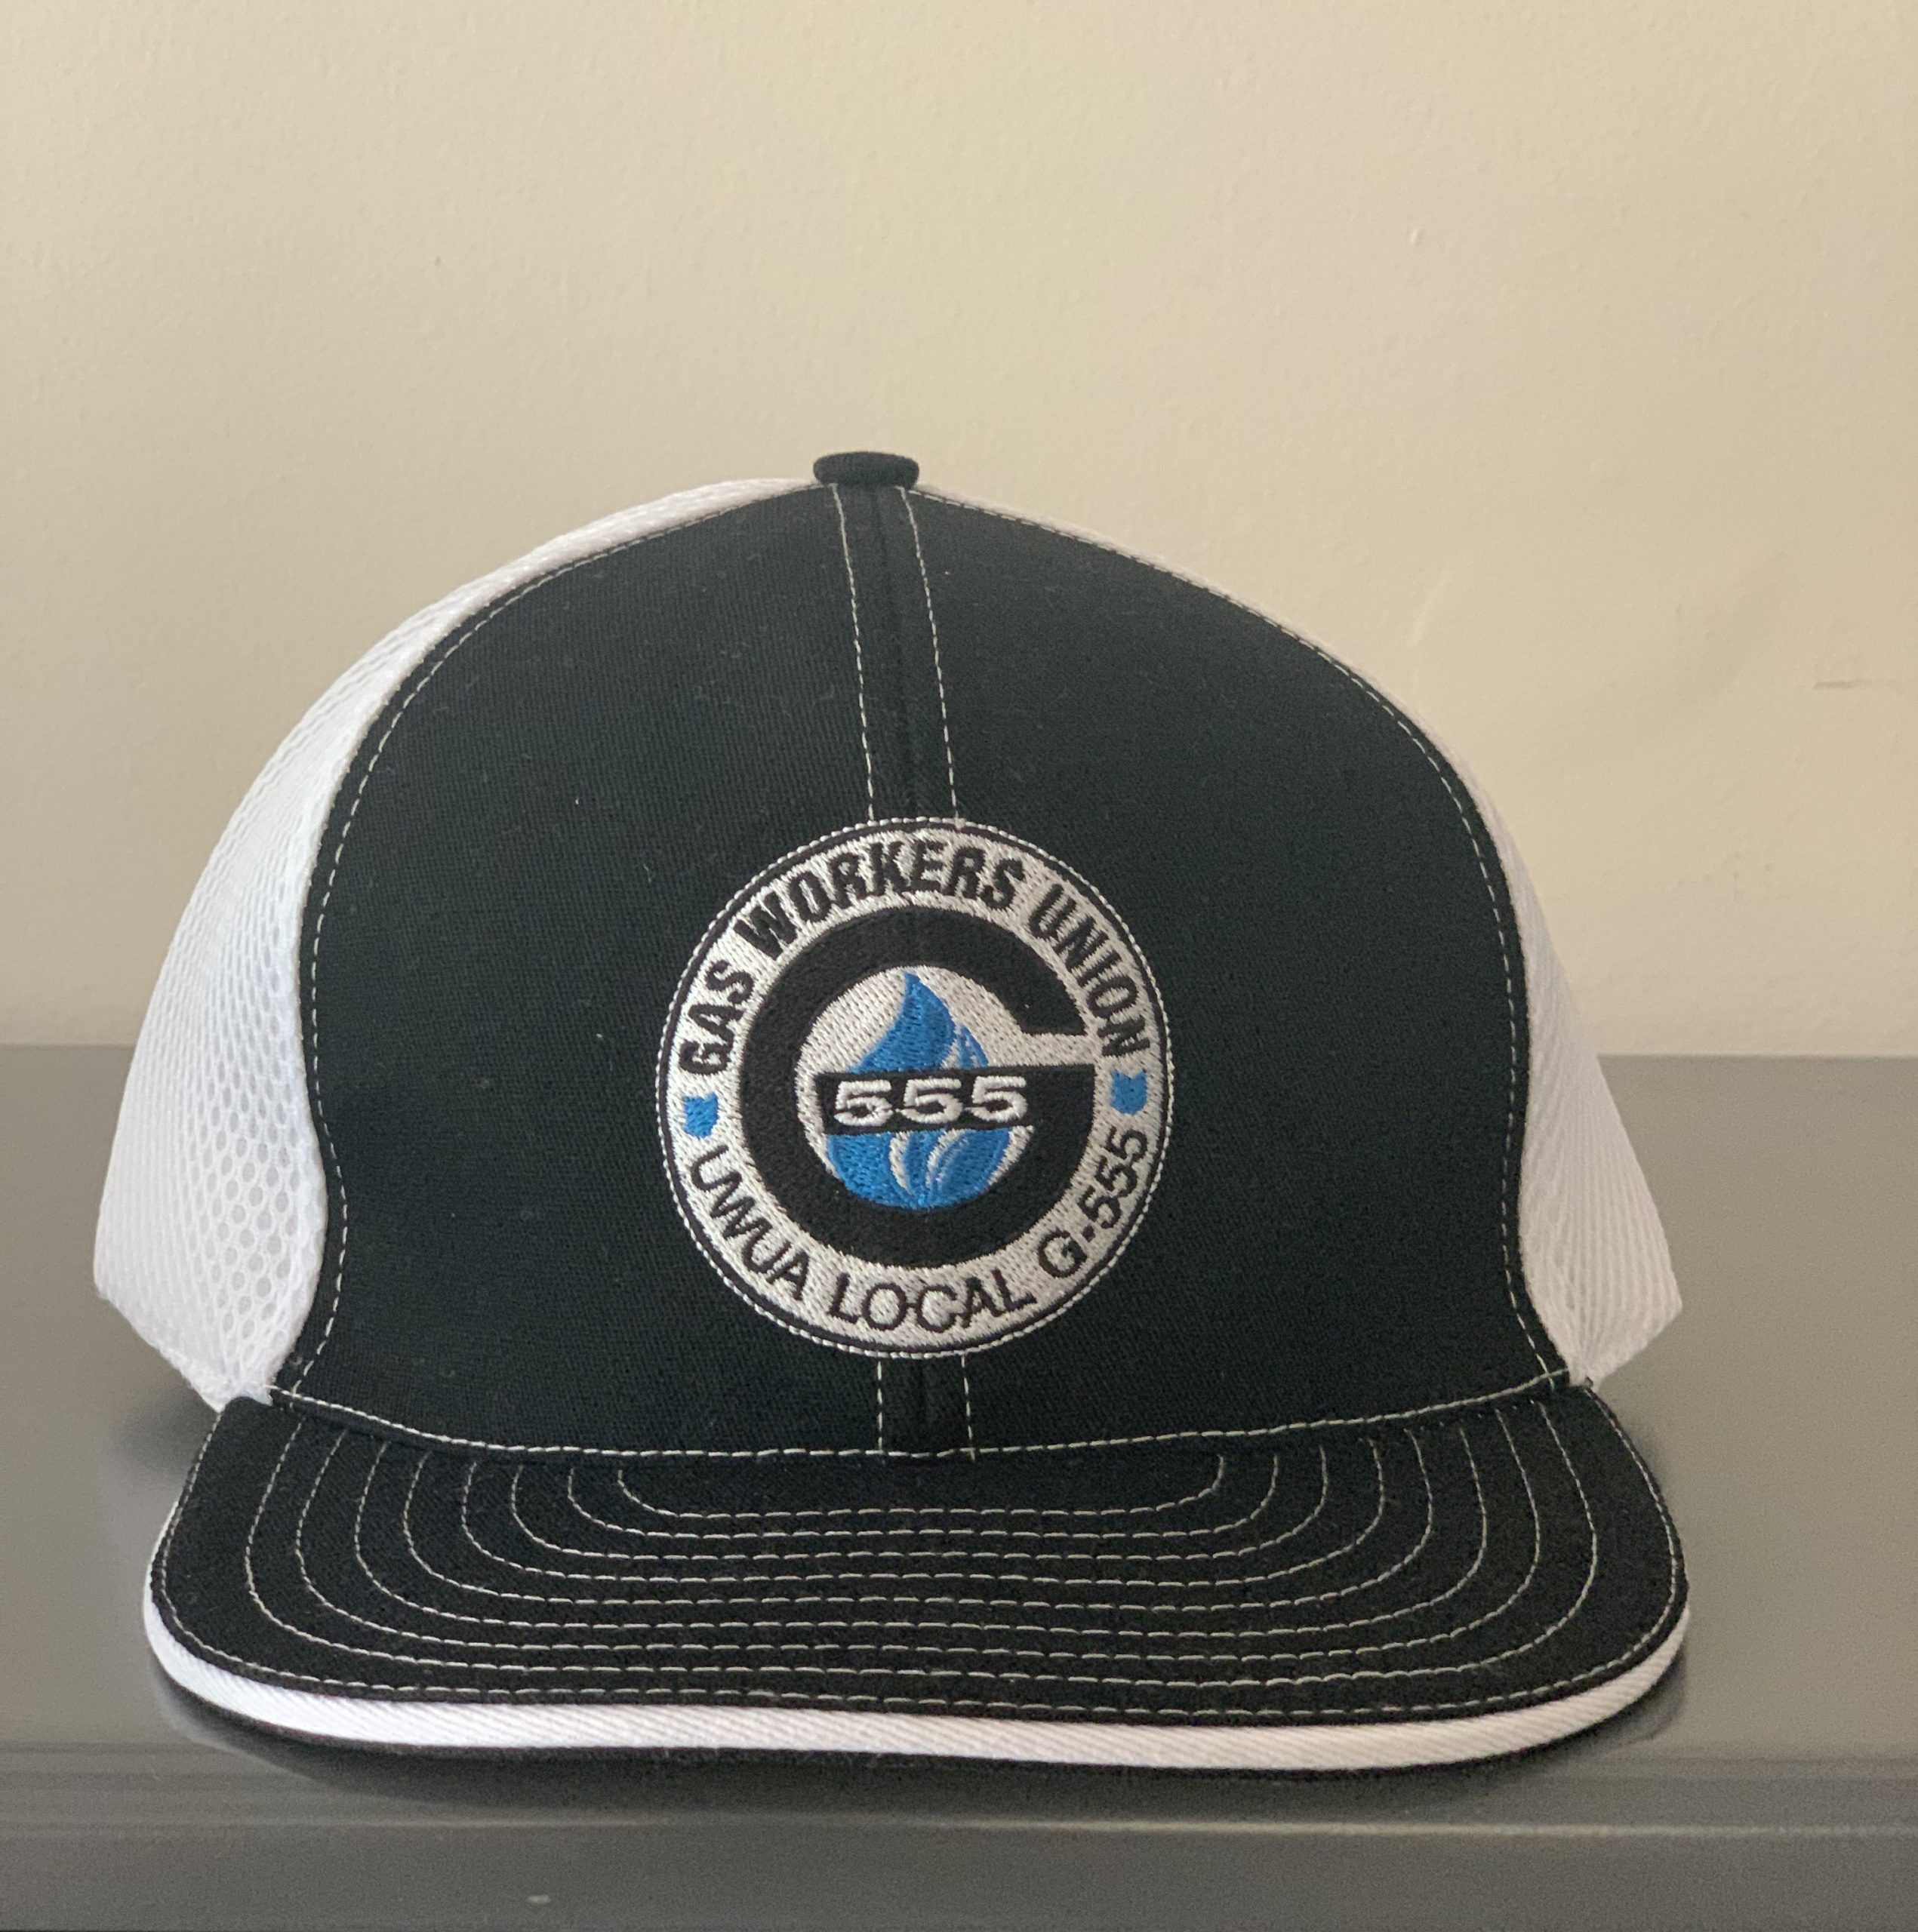 Ball Cap – Black/White Fitted – Large/XL | Gas Workers Union Local G-555